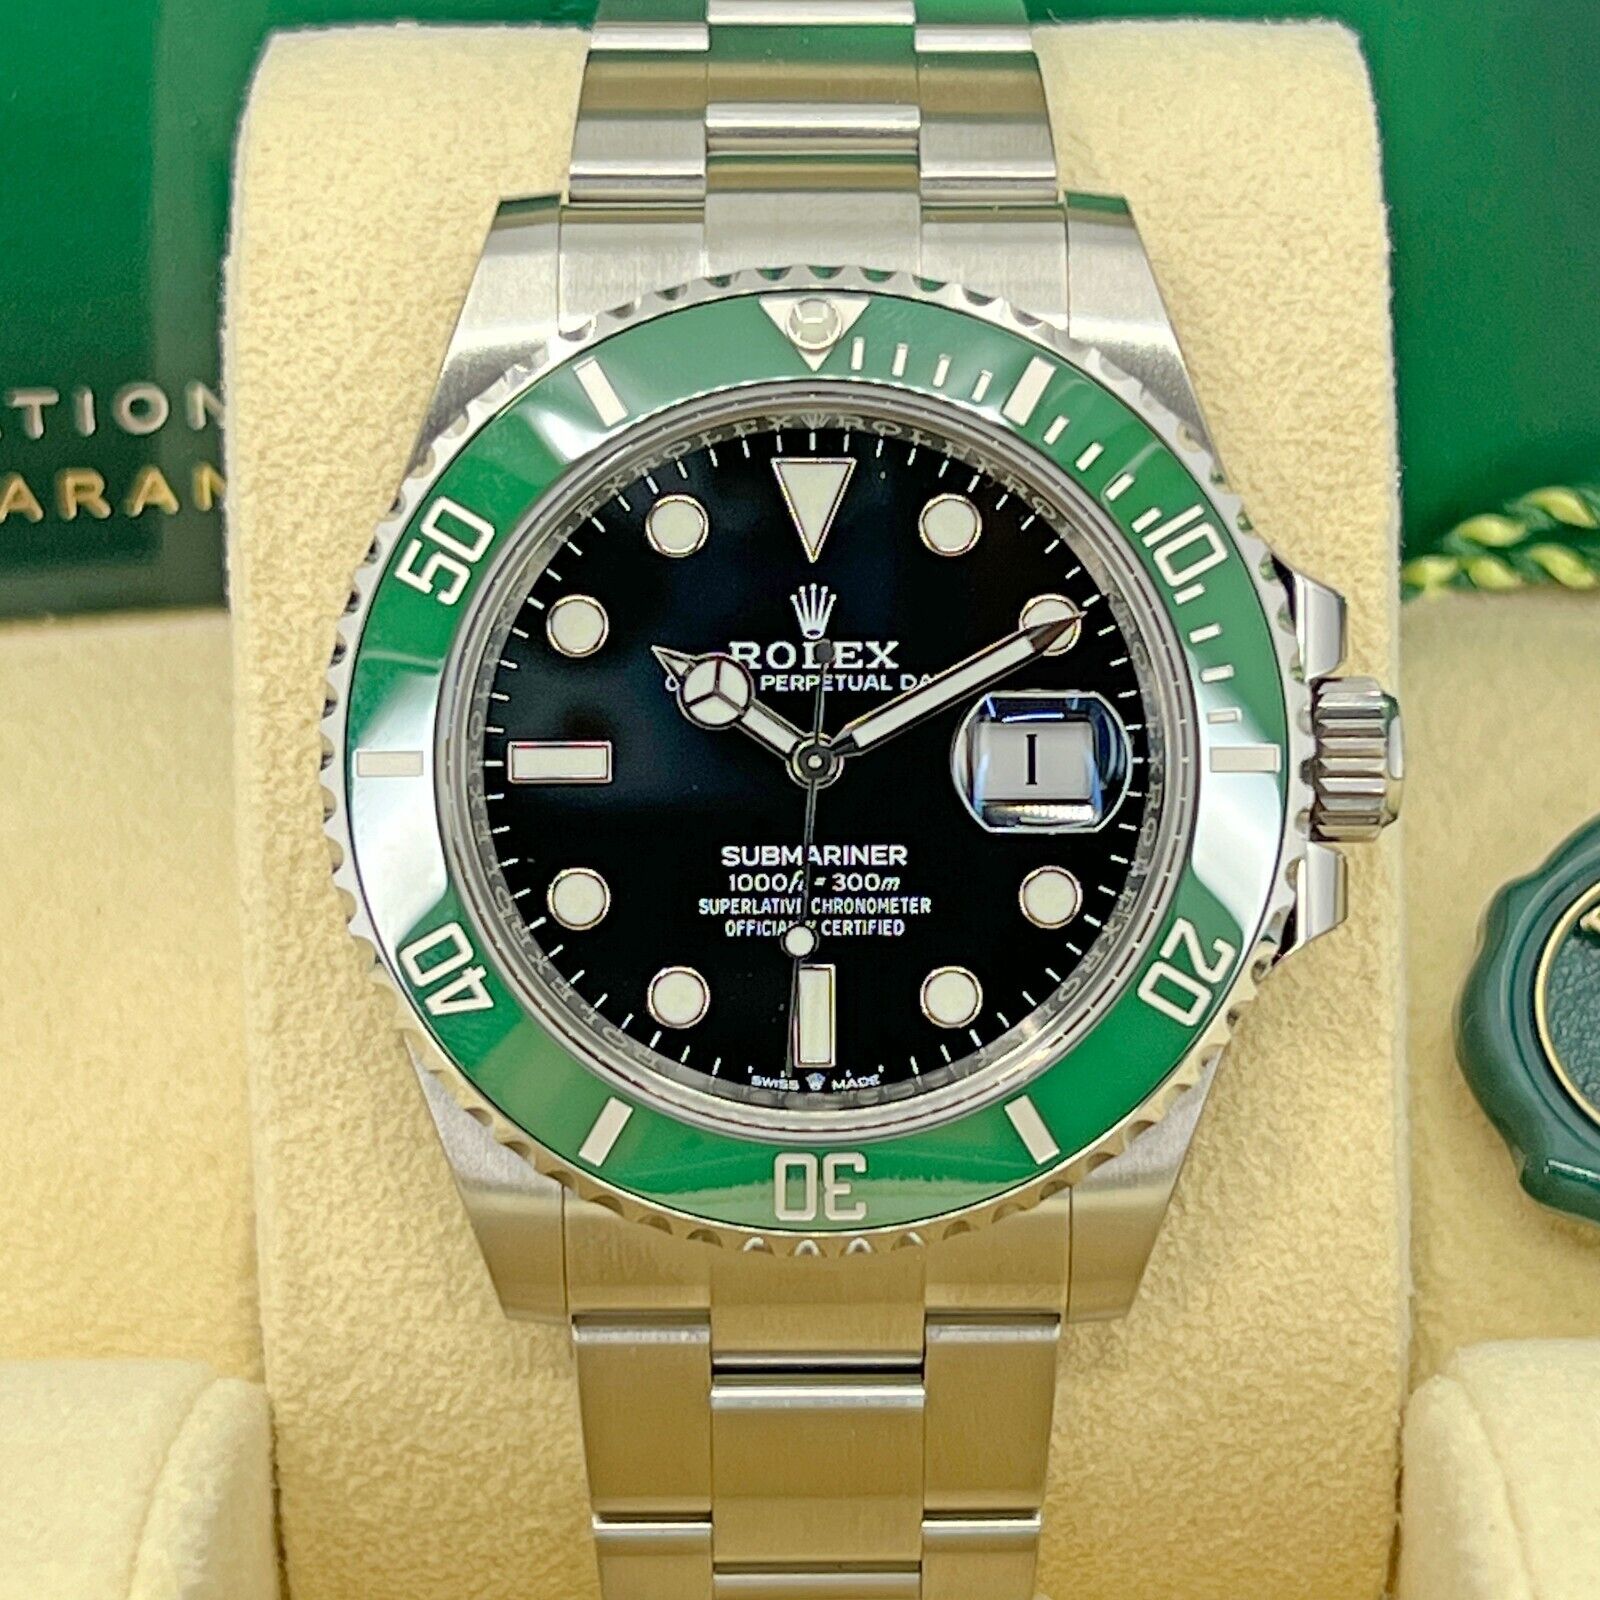 Rolex Submariner Date 41 126610LV Starbucks - NEW Unworn for $18,539  for sale from a Trusted Seller on Chrono24